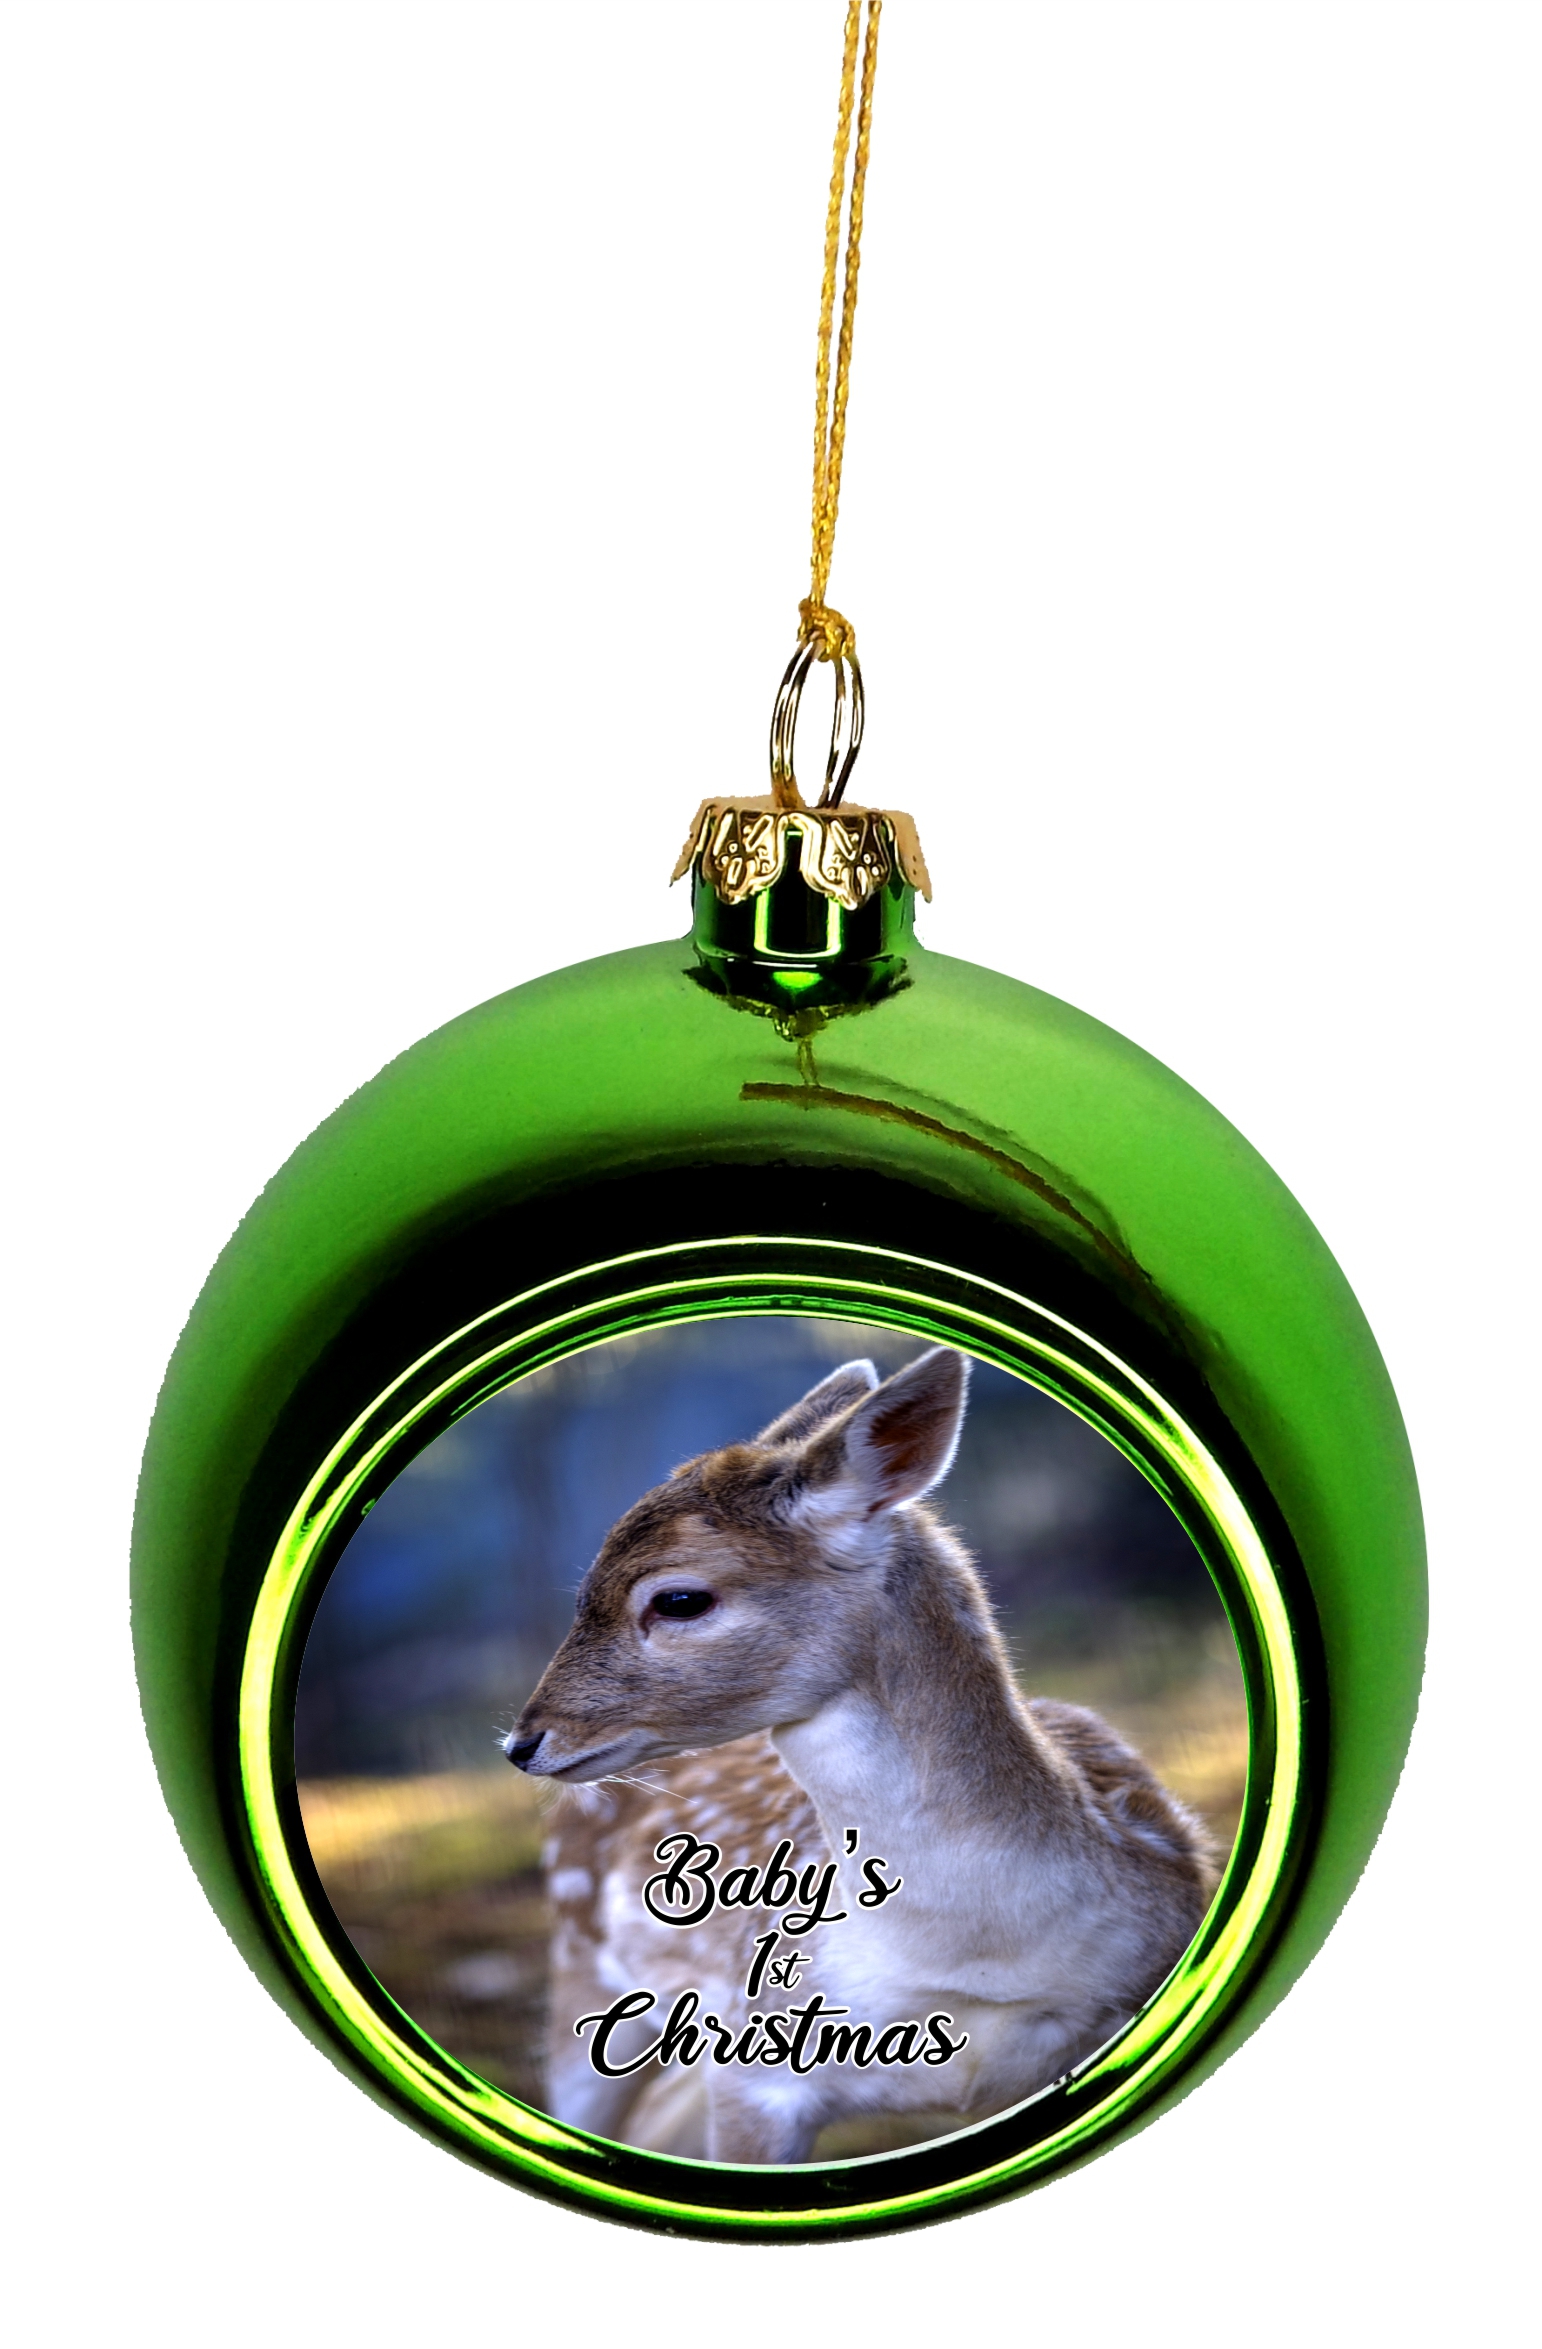 Babys First Christmas Xmas Ornament New Baby First Year Ornament  - Baby 1st Xmas Ornament - Baby 1st Christmas Ornament Christmas DÃ©cor Green Ball Ornaments - image 1 of 1